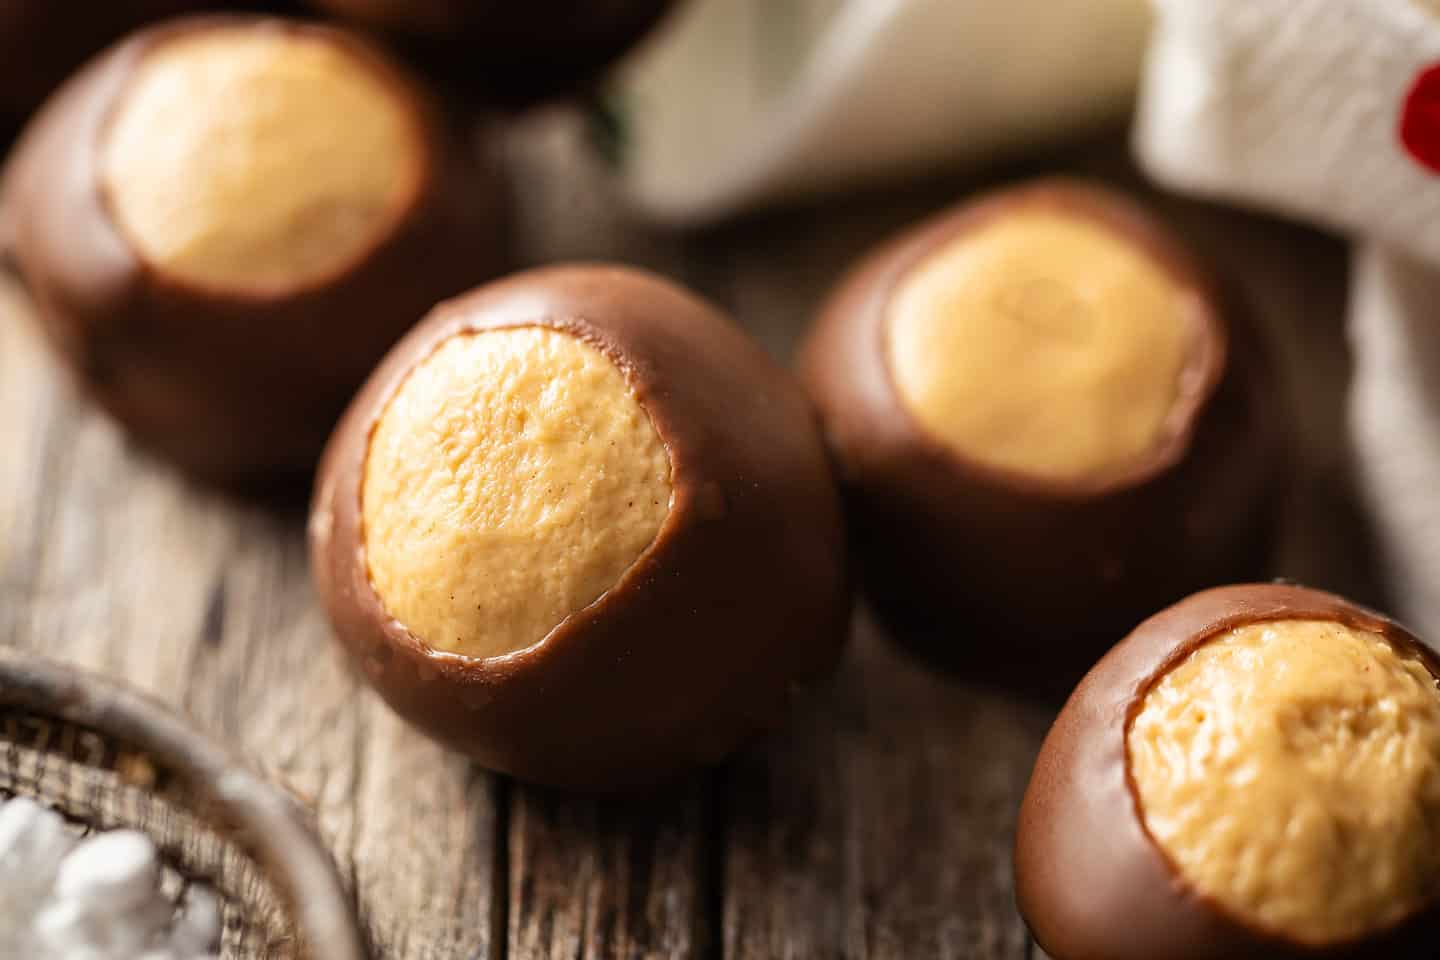 Buckeye candy recipe, made with peanut butter and chocolate.